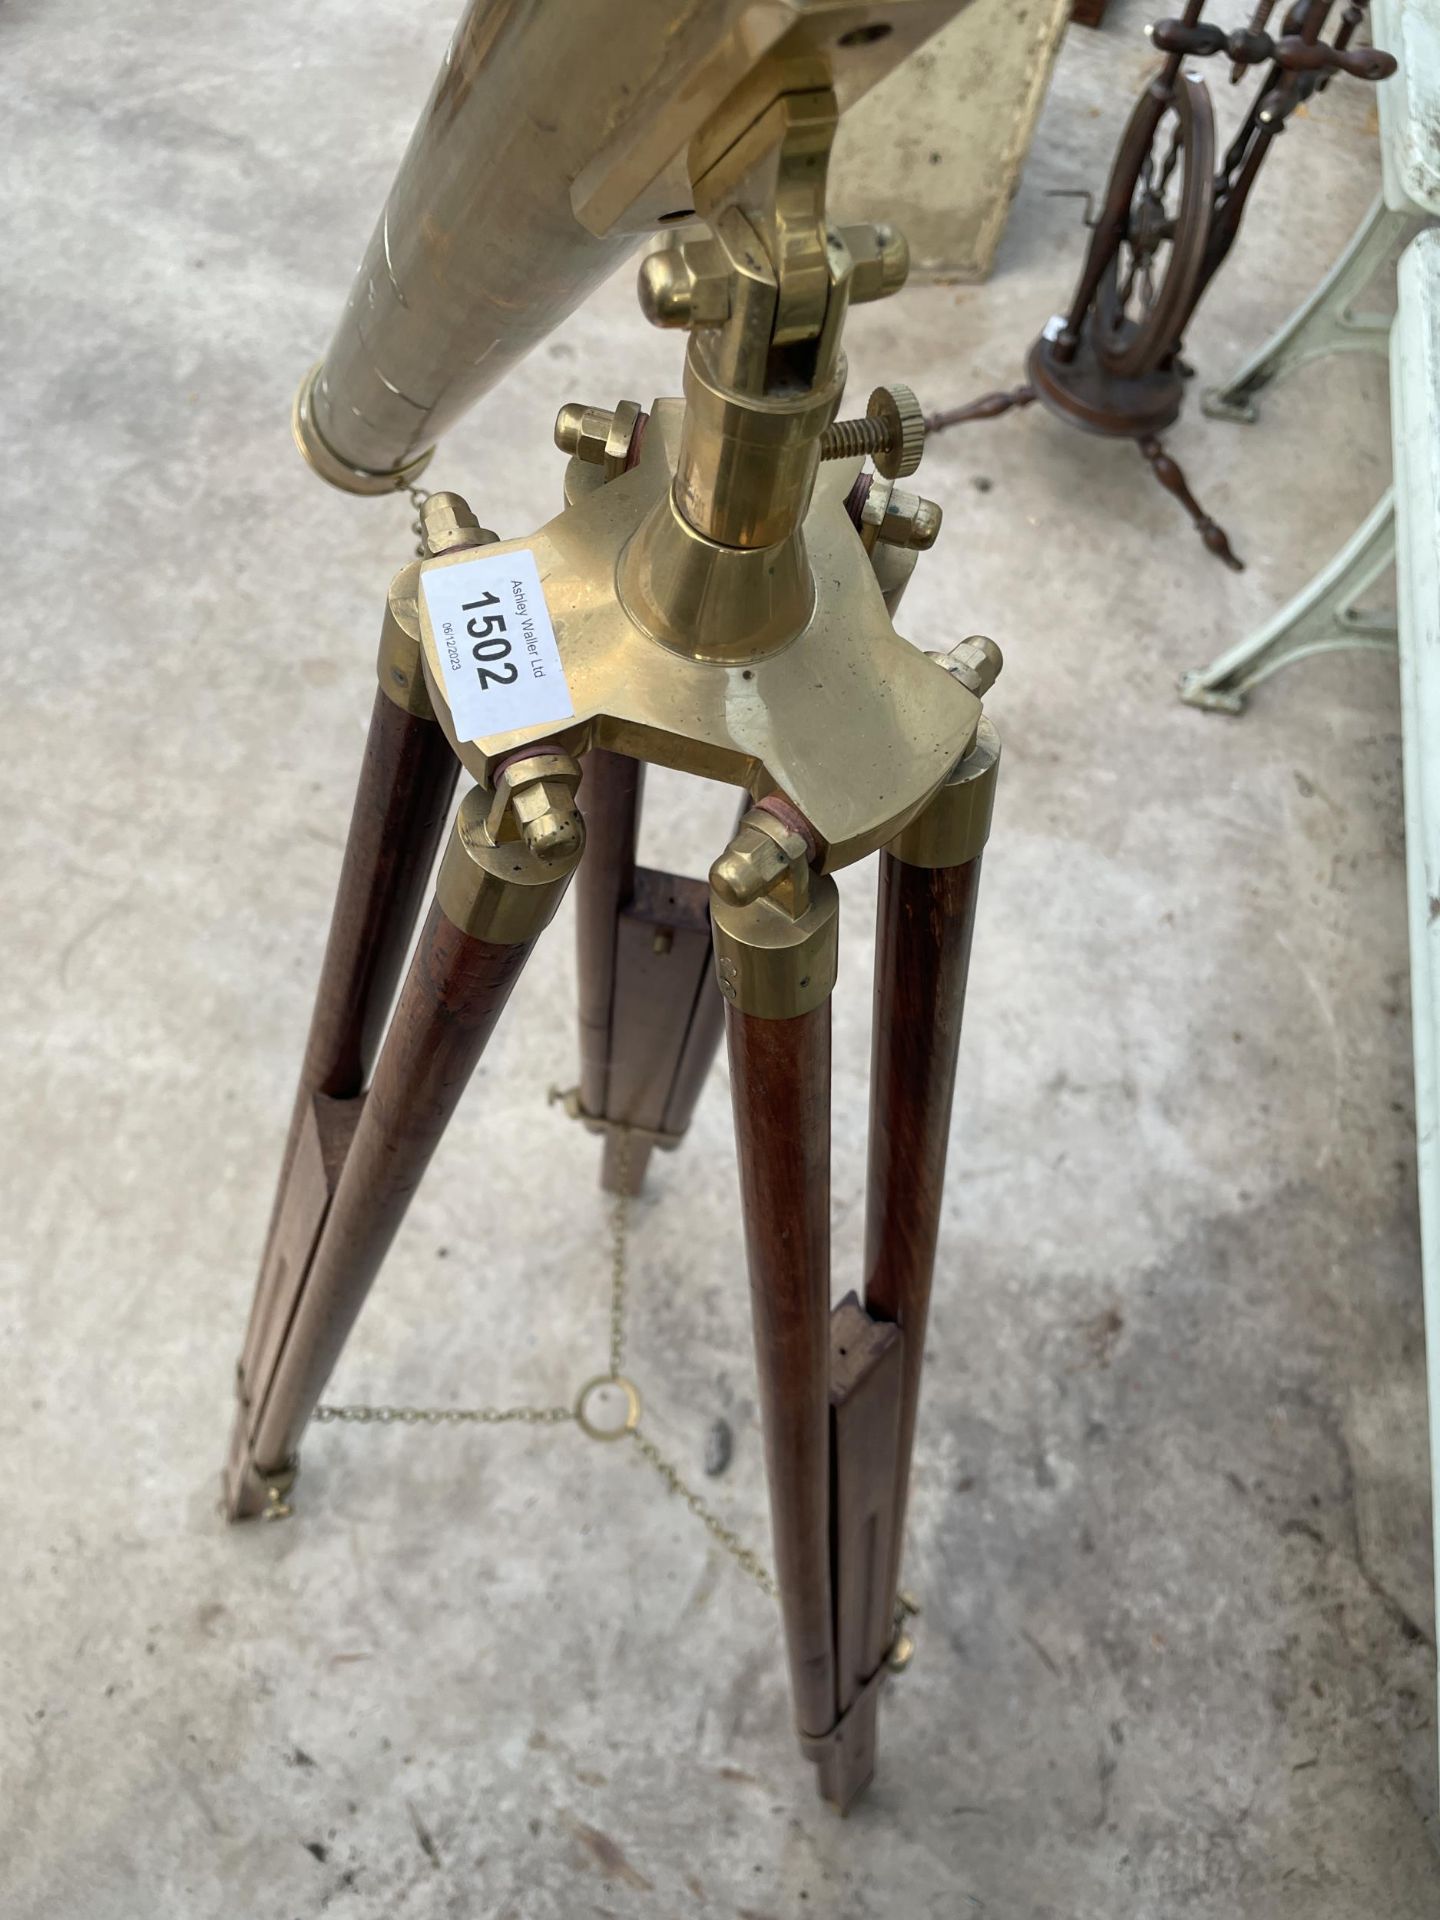 A VINTAGE BRASS TELESCOPE WITH WOODEN TRIPOD STAND - Image 3 of 7